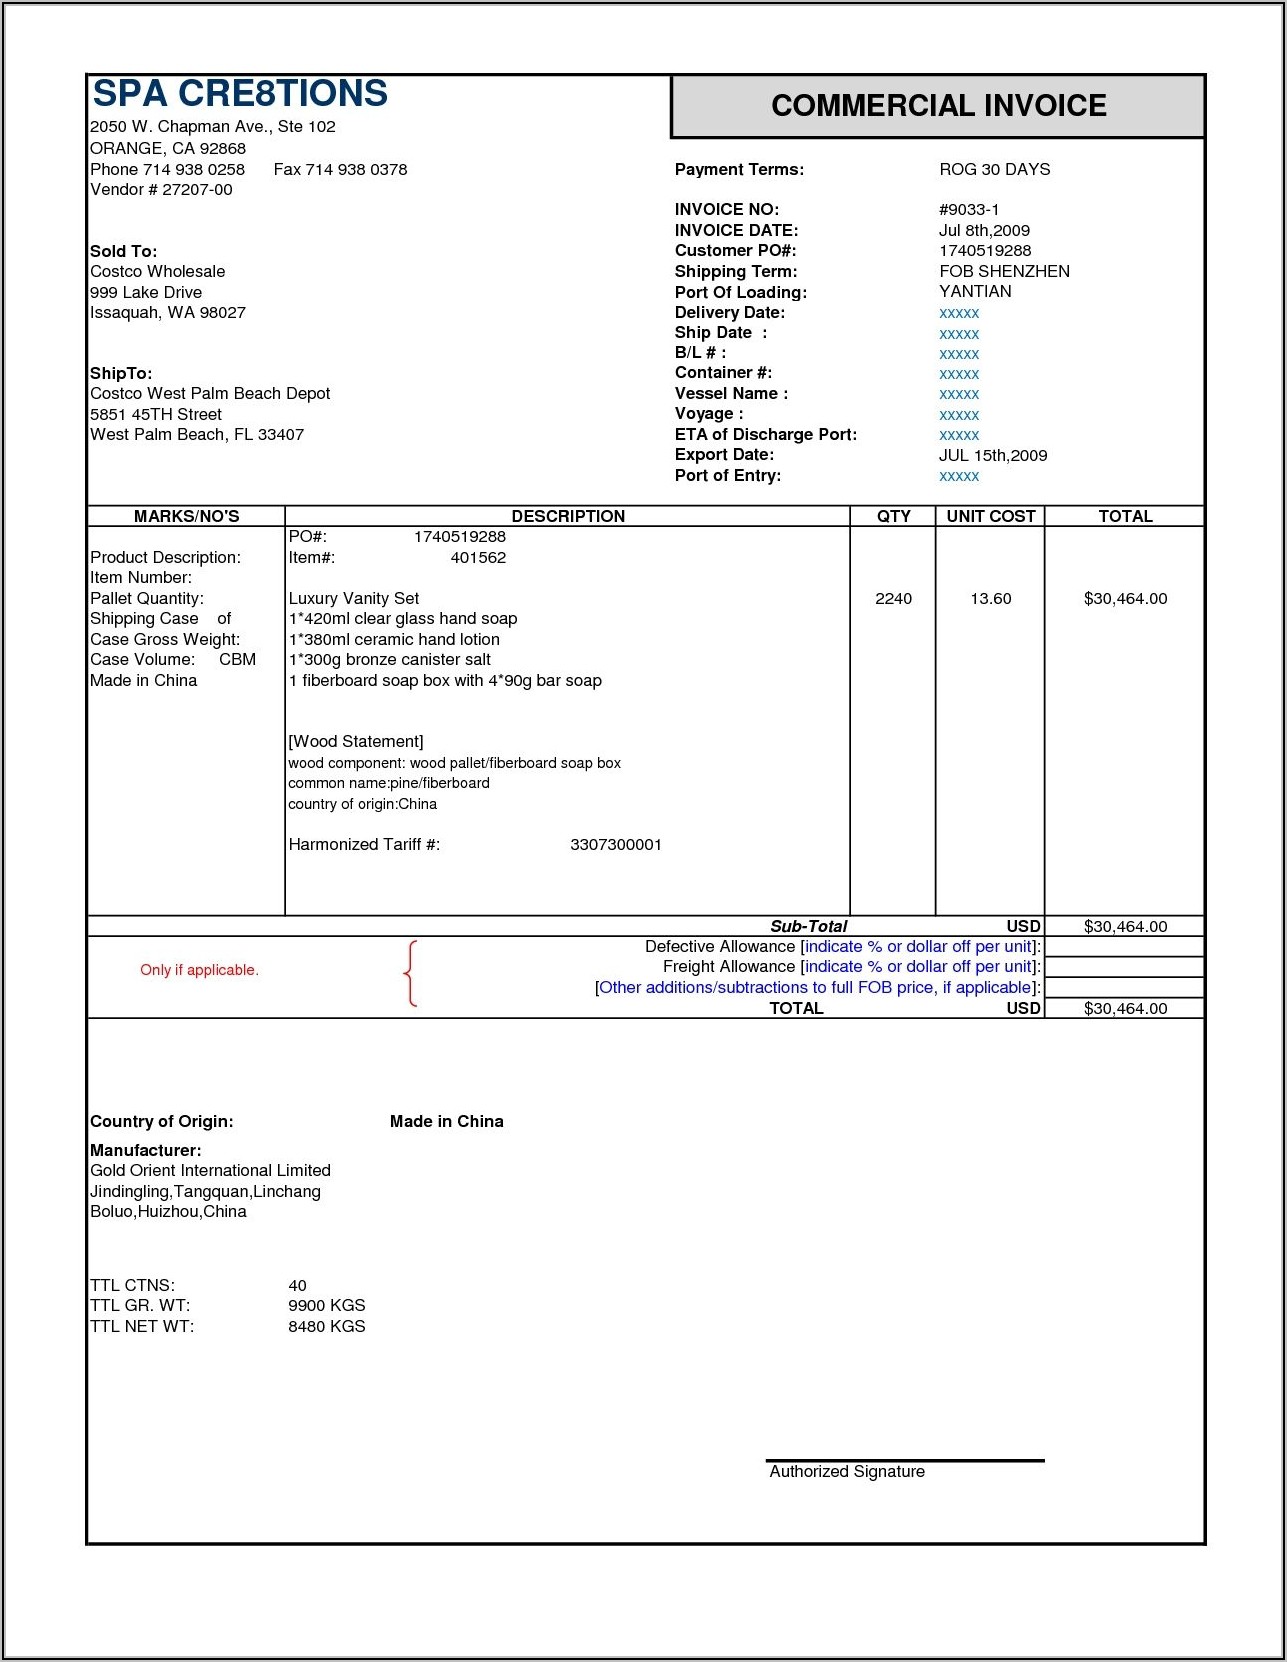 Ups Commercial Invoice Editable Pdf